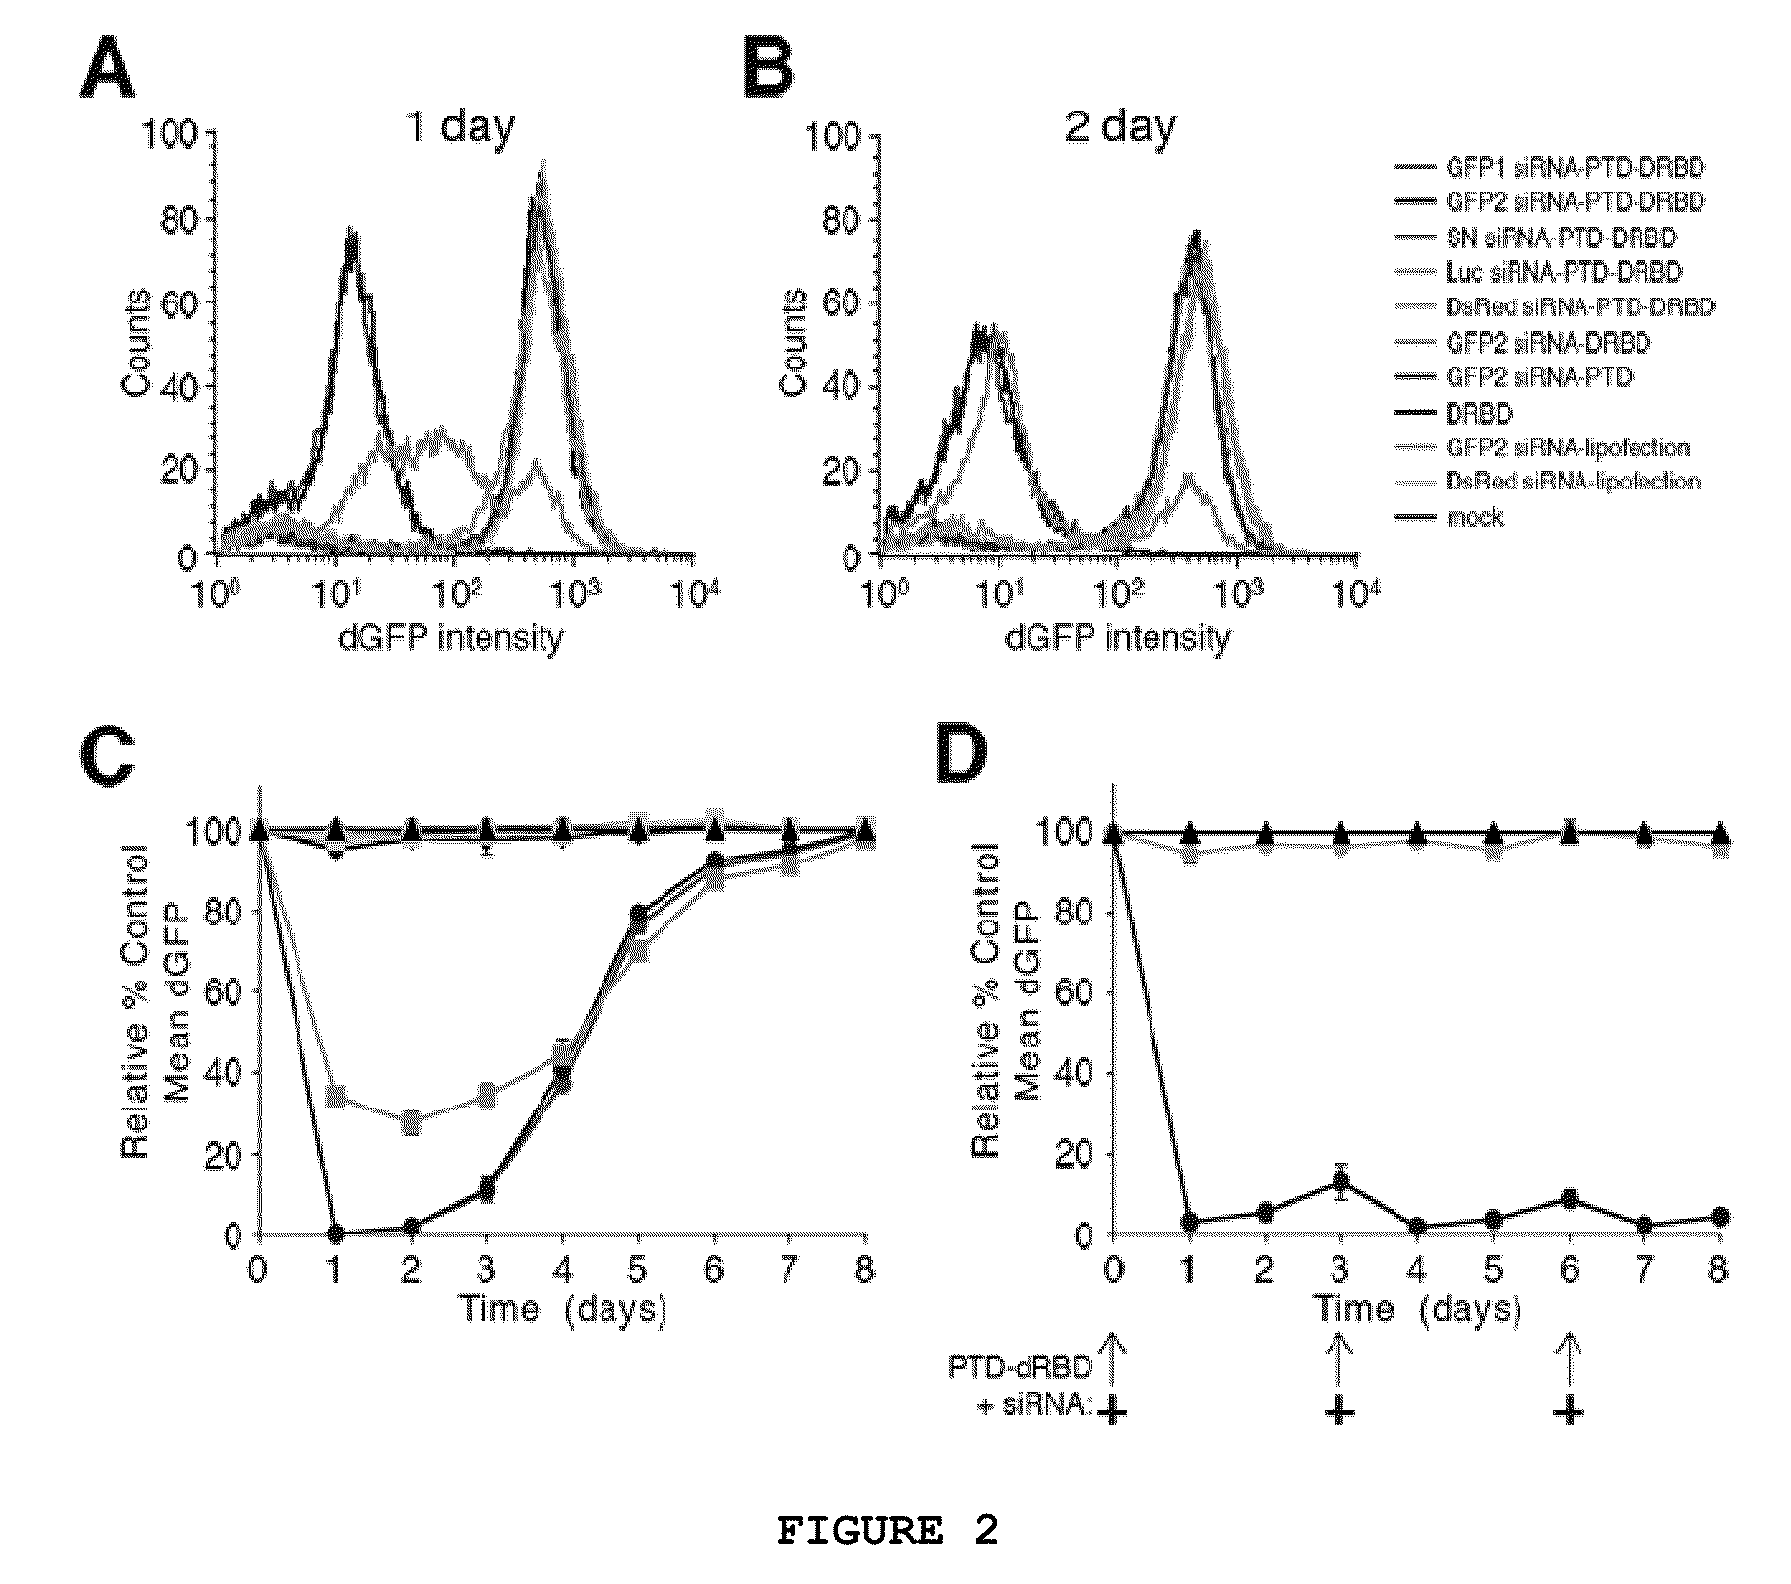 TRANSDUCIBLE DELIVERY OF siRNA BY dsRNA BINDING DOMAIN FUSIONS TO PTD/CPPS